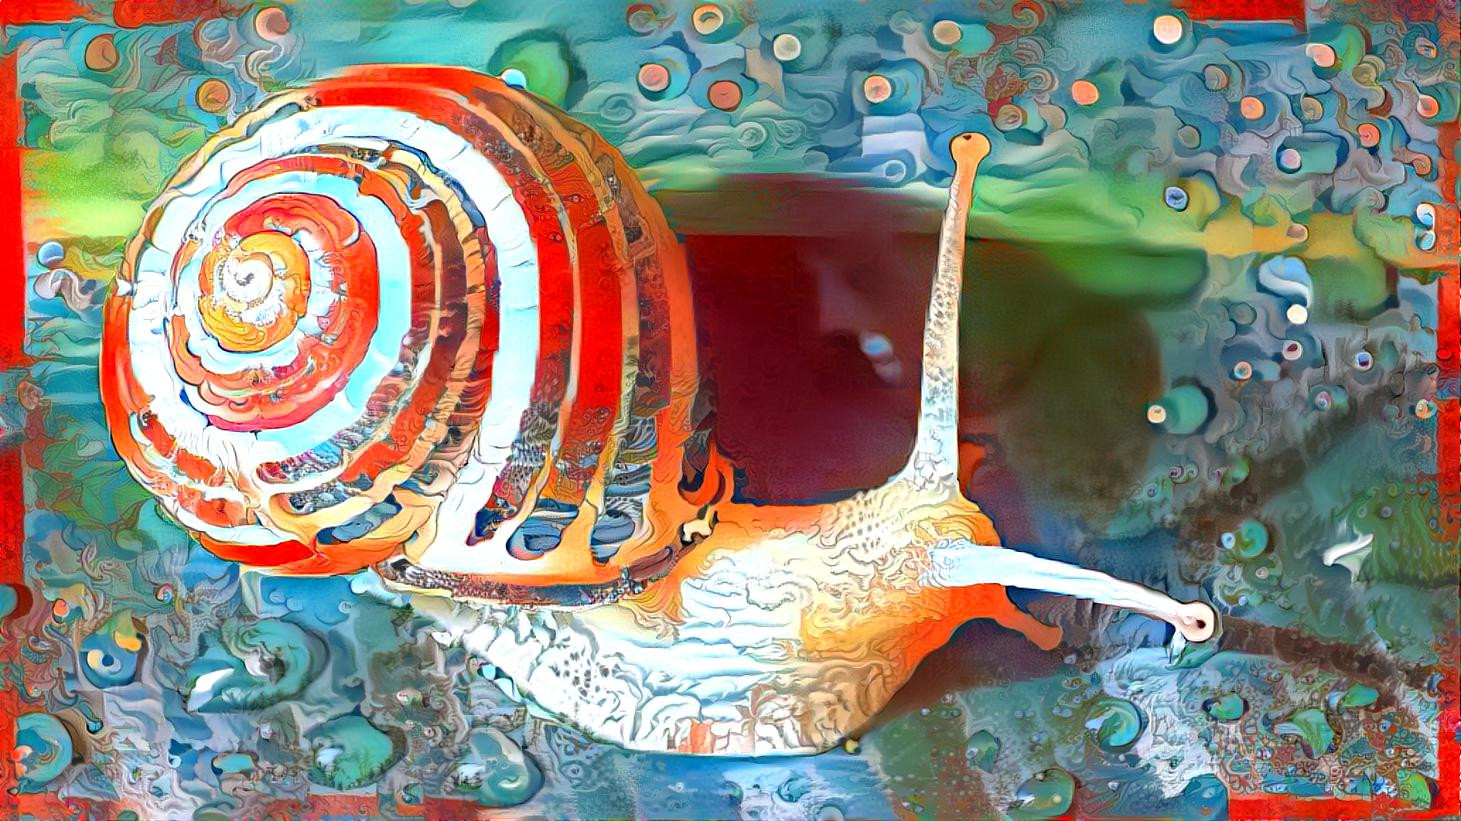 Painted Mural Snail